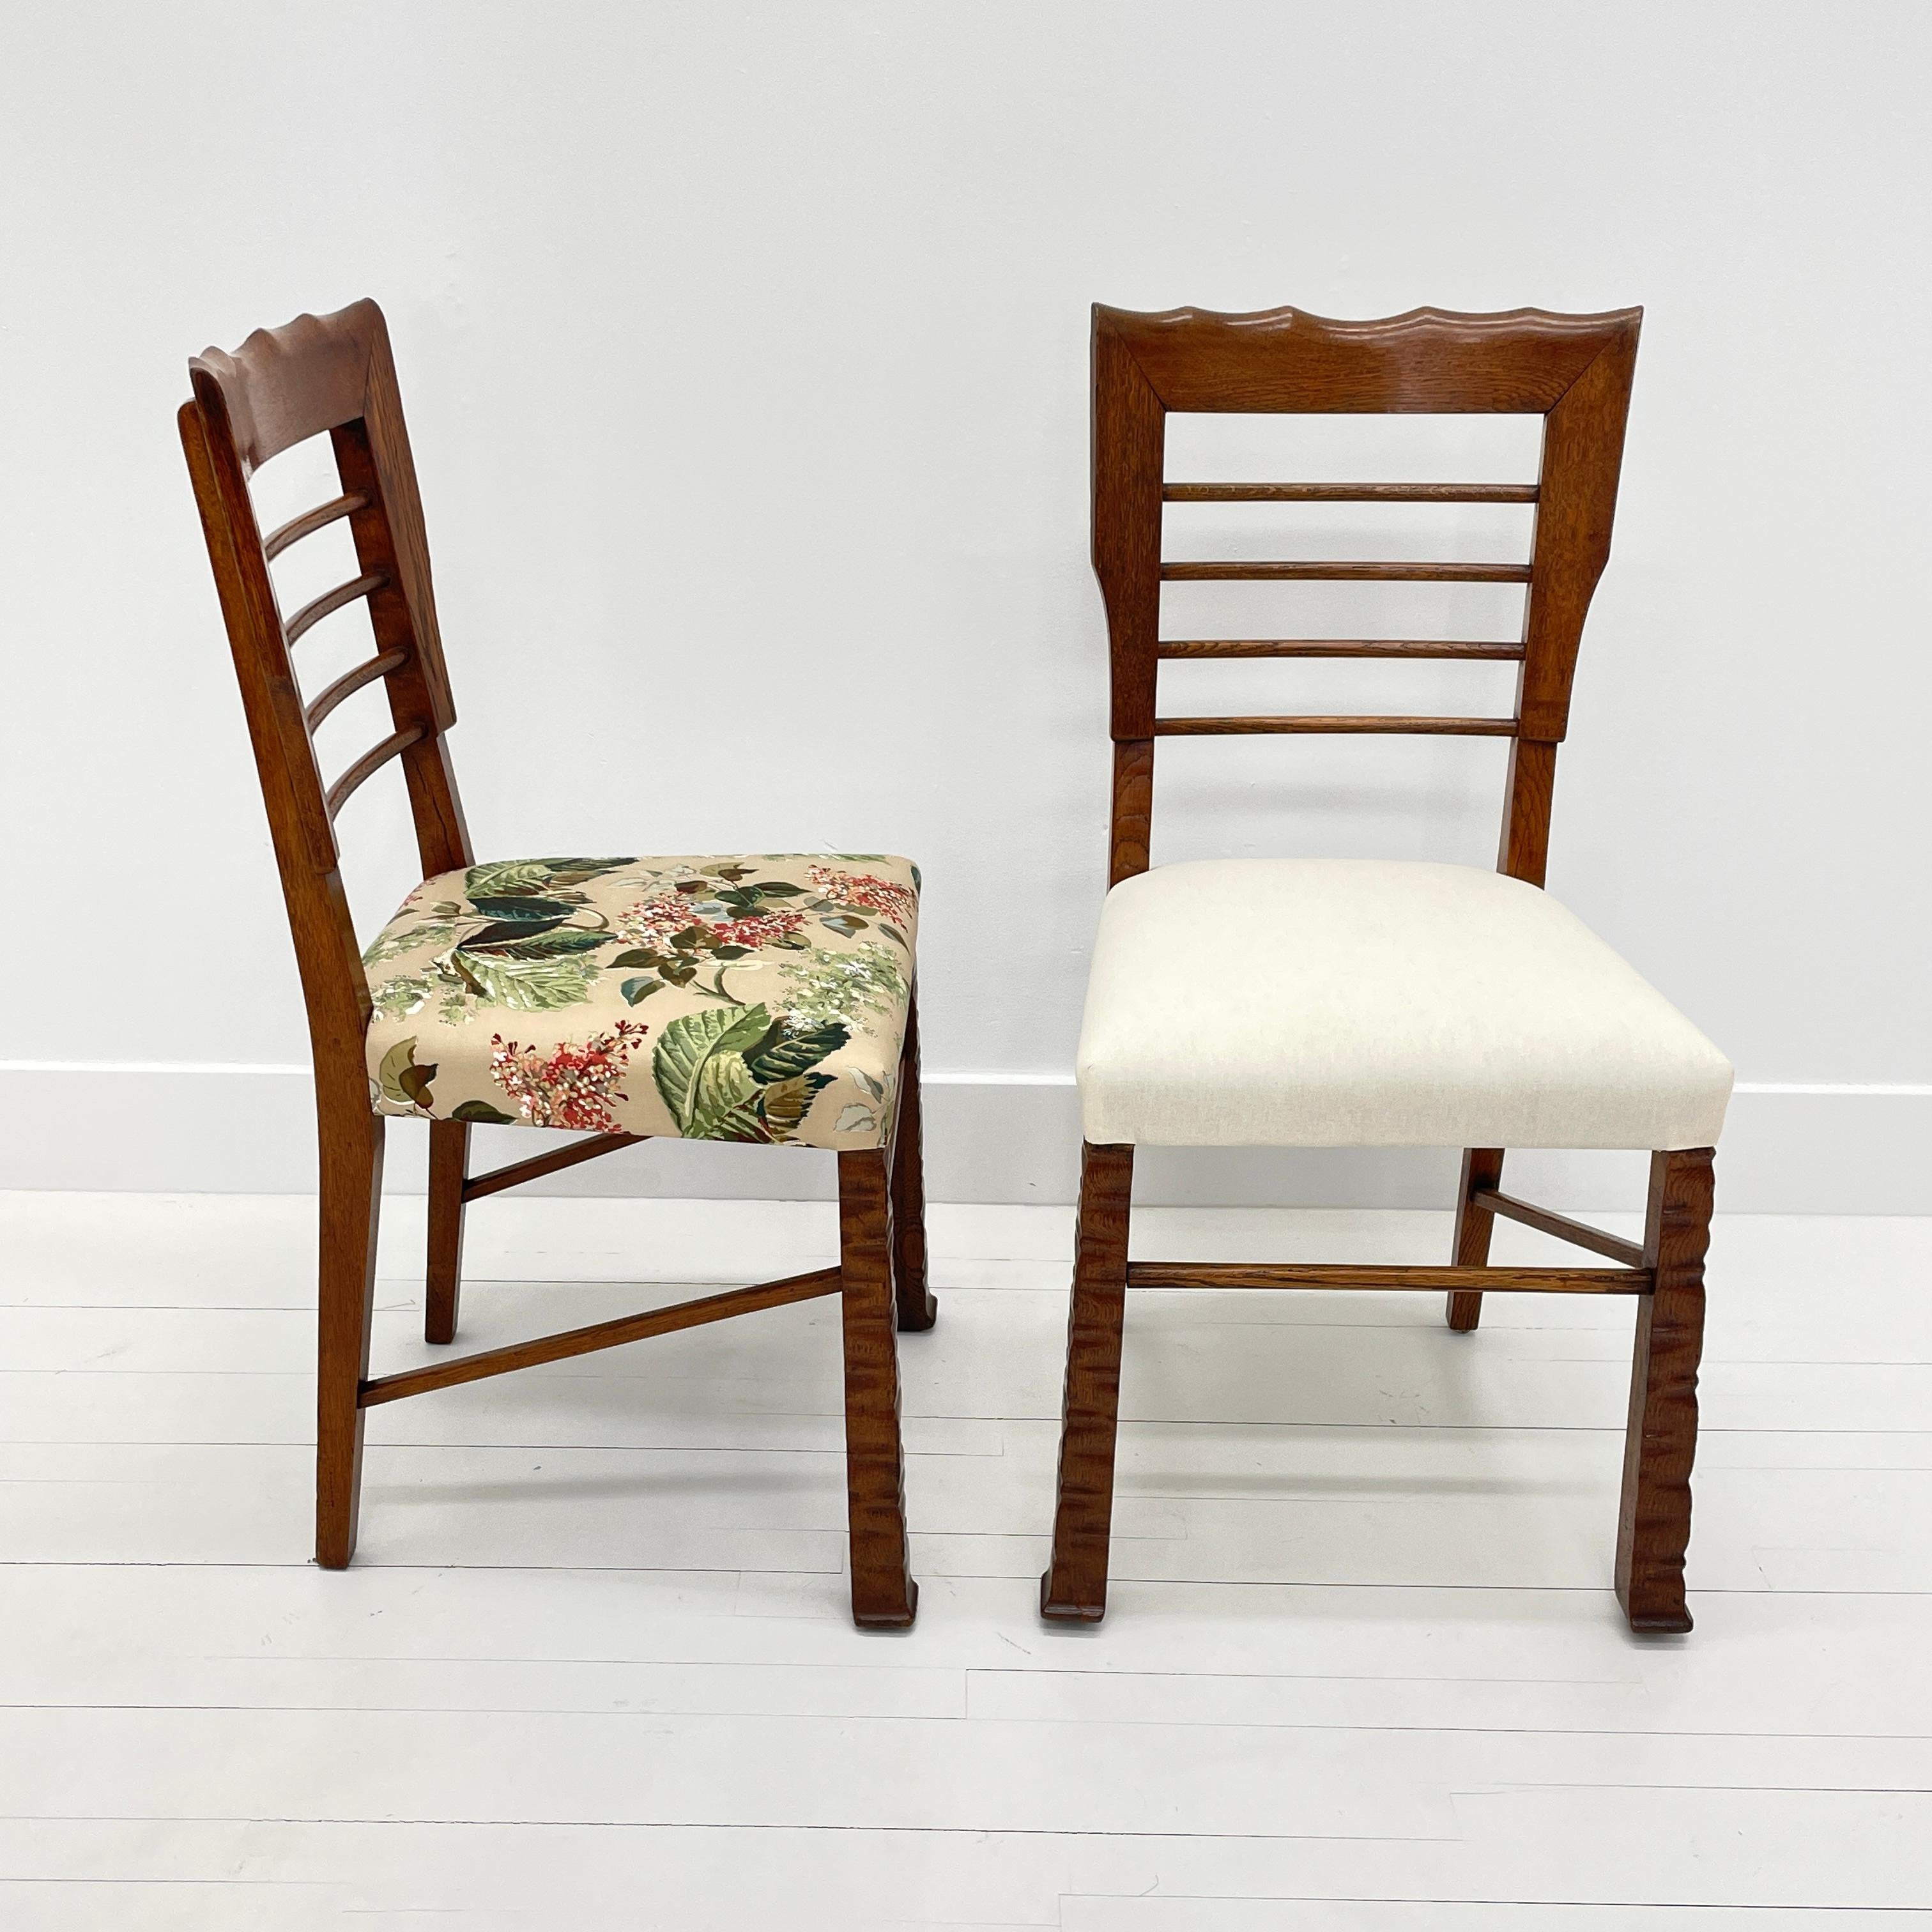 Rustic Scalloped Edge Dining Chairs, Set of 10, Italy, 1940's For Sale 11